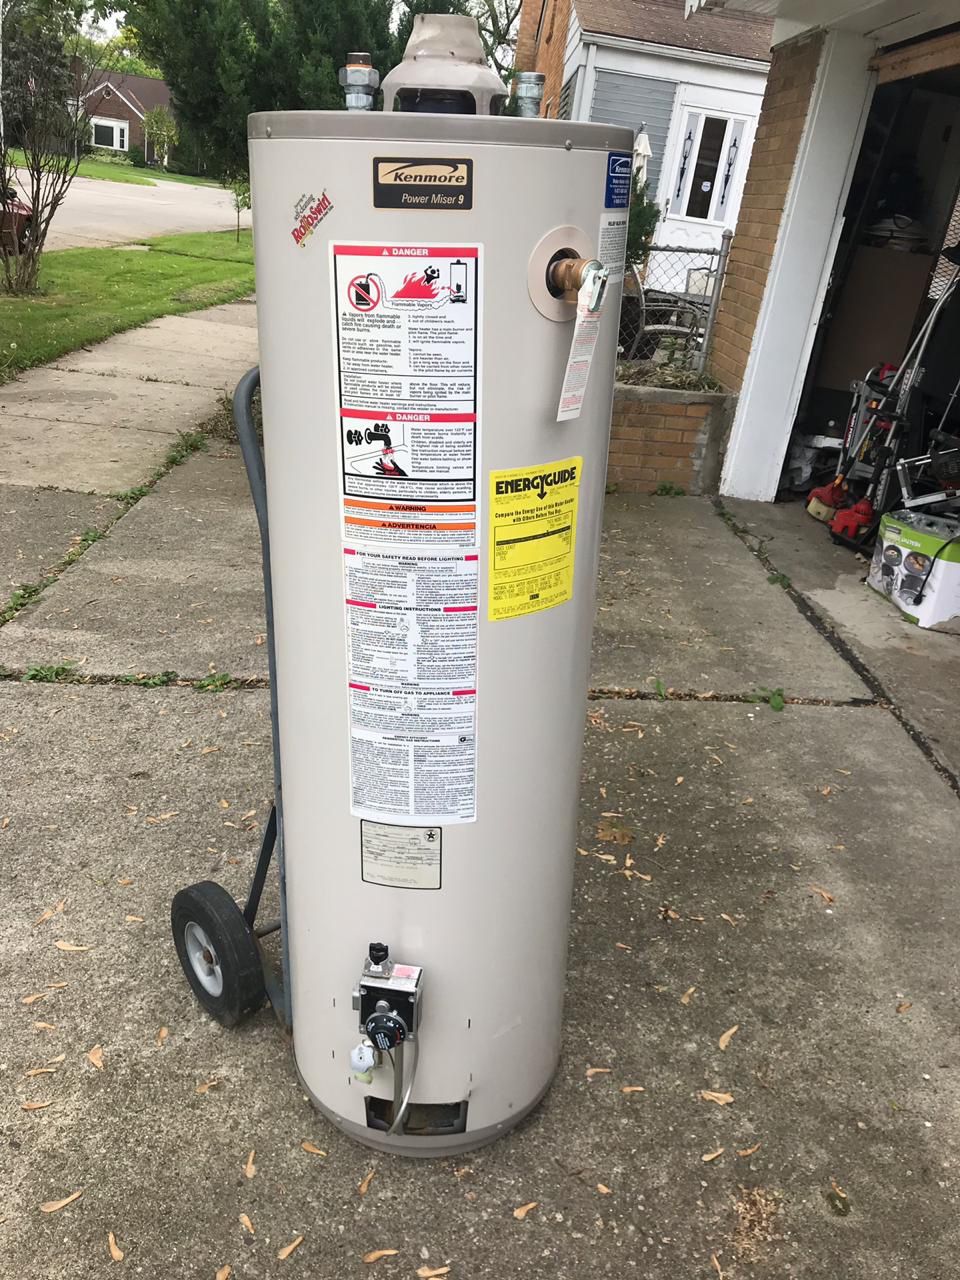 Water heaters for sale , i have 4, each one is for 120